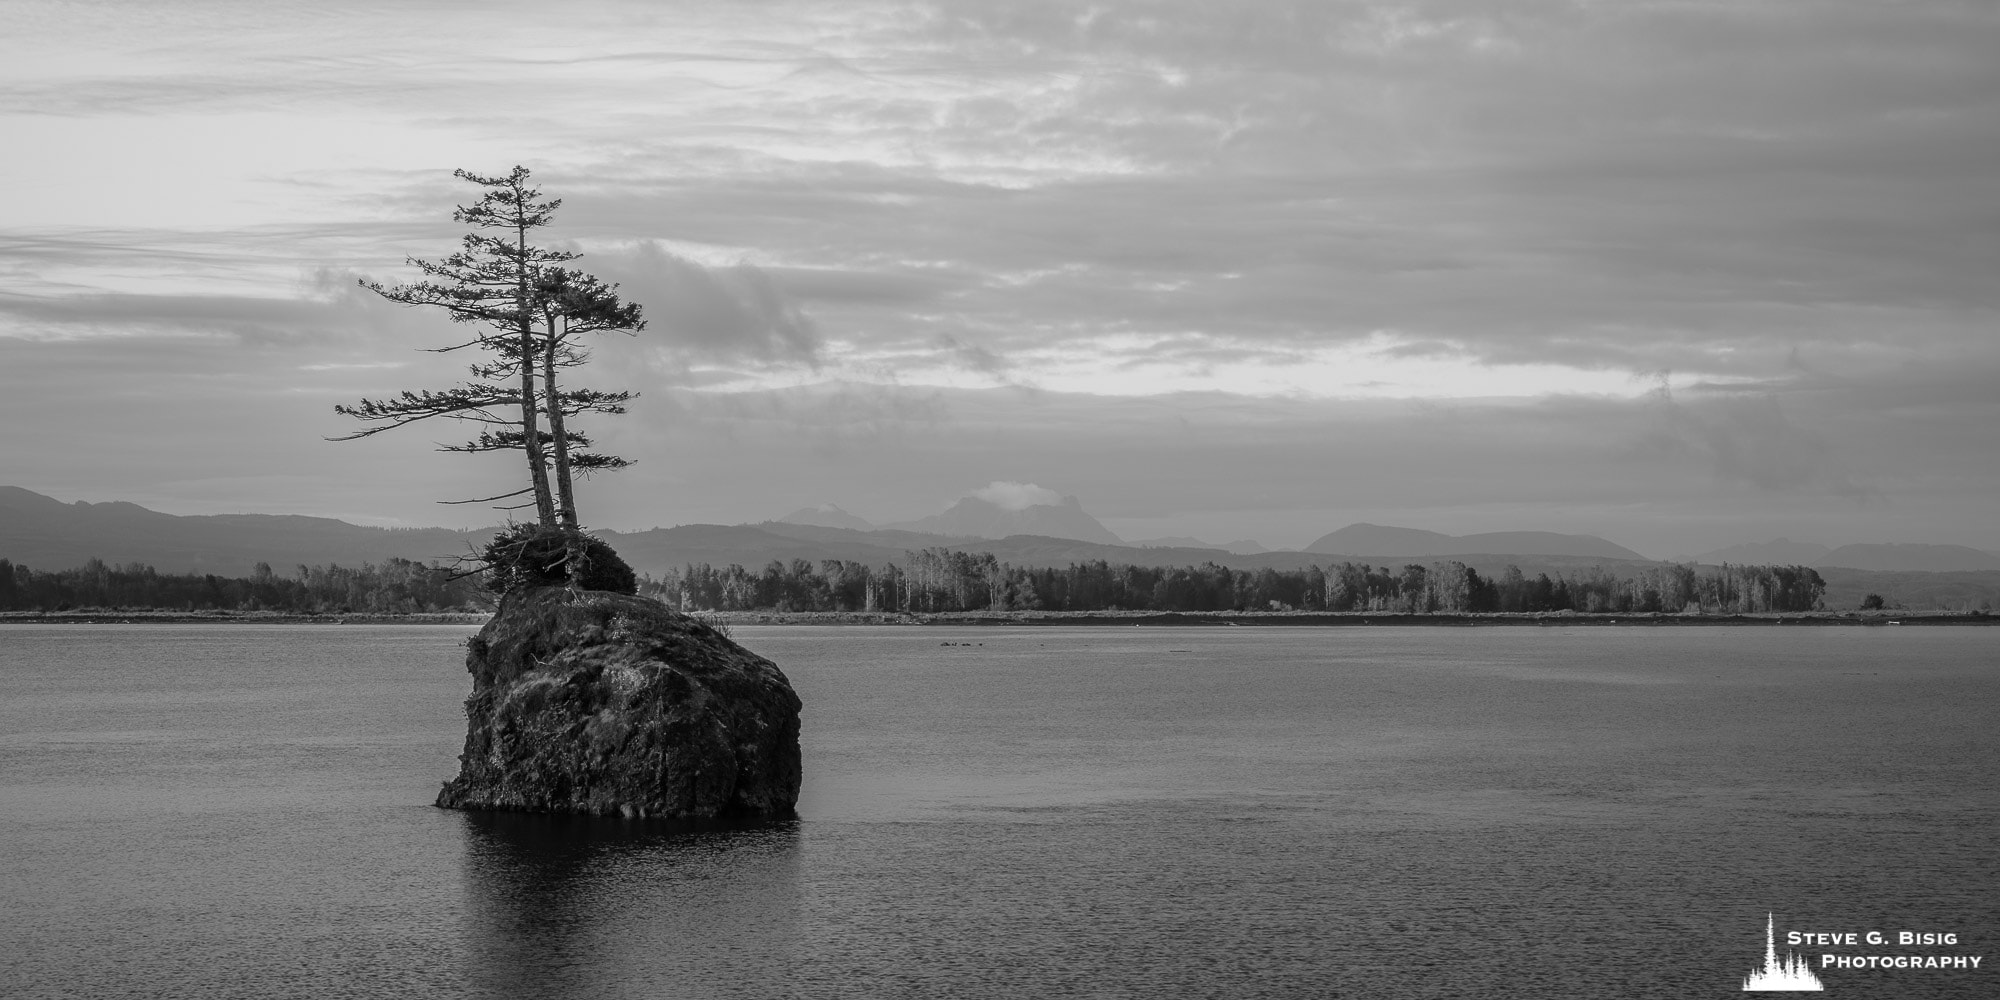 A black and white landscape photograph of two trees growing on a rock in the Columbia River near Altoona, Washington.